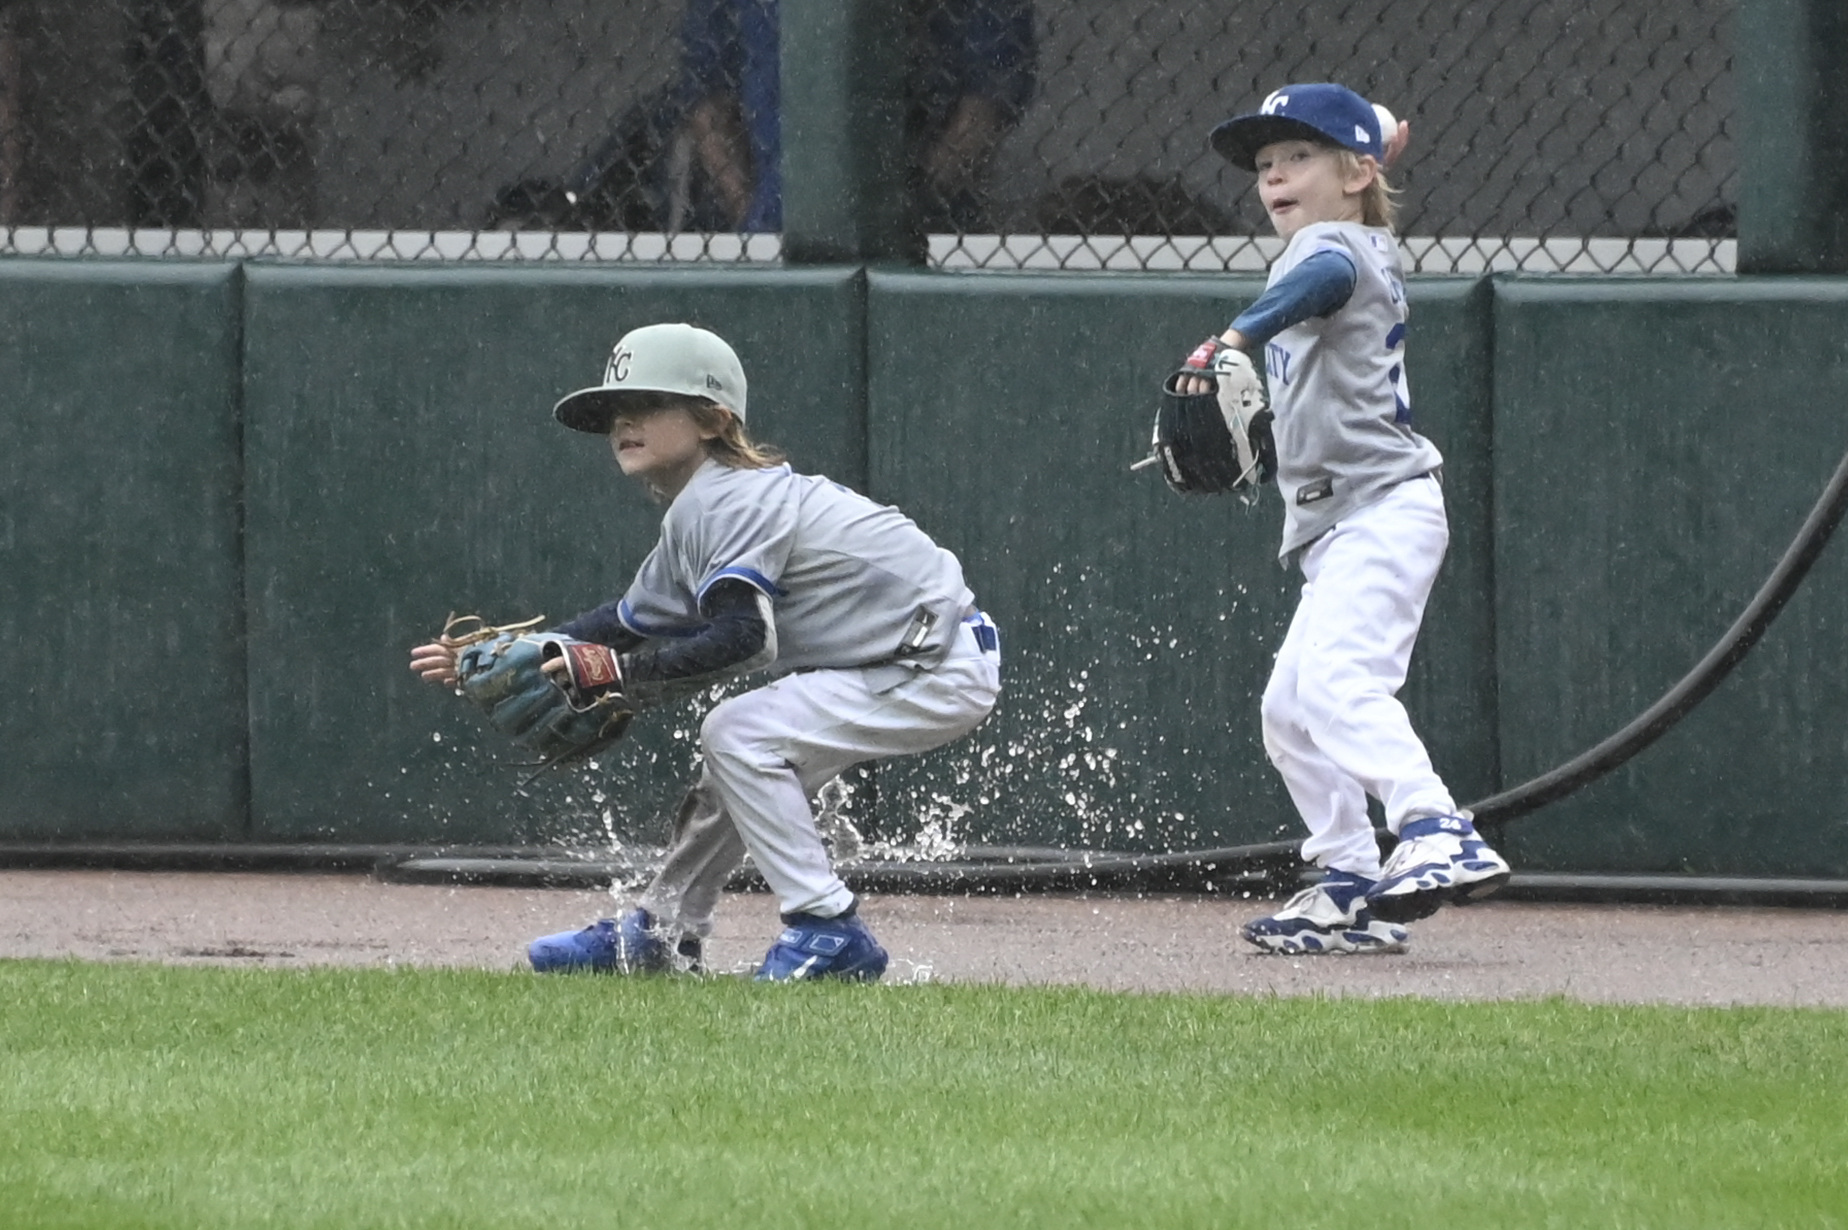 Royals-White Sox rained out - Chicago Sun-Times